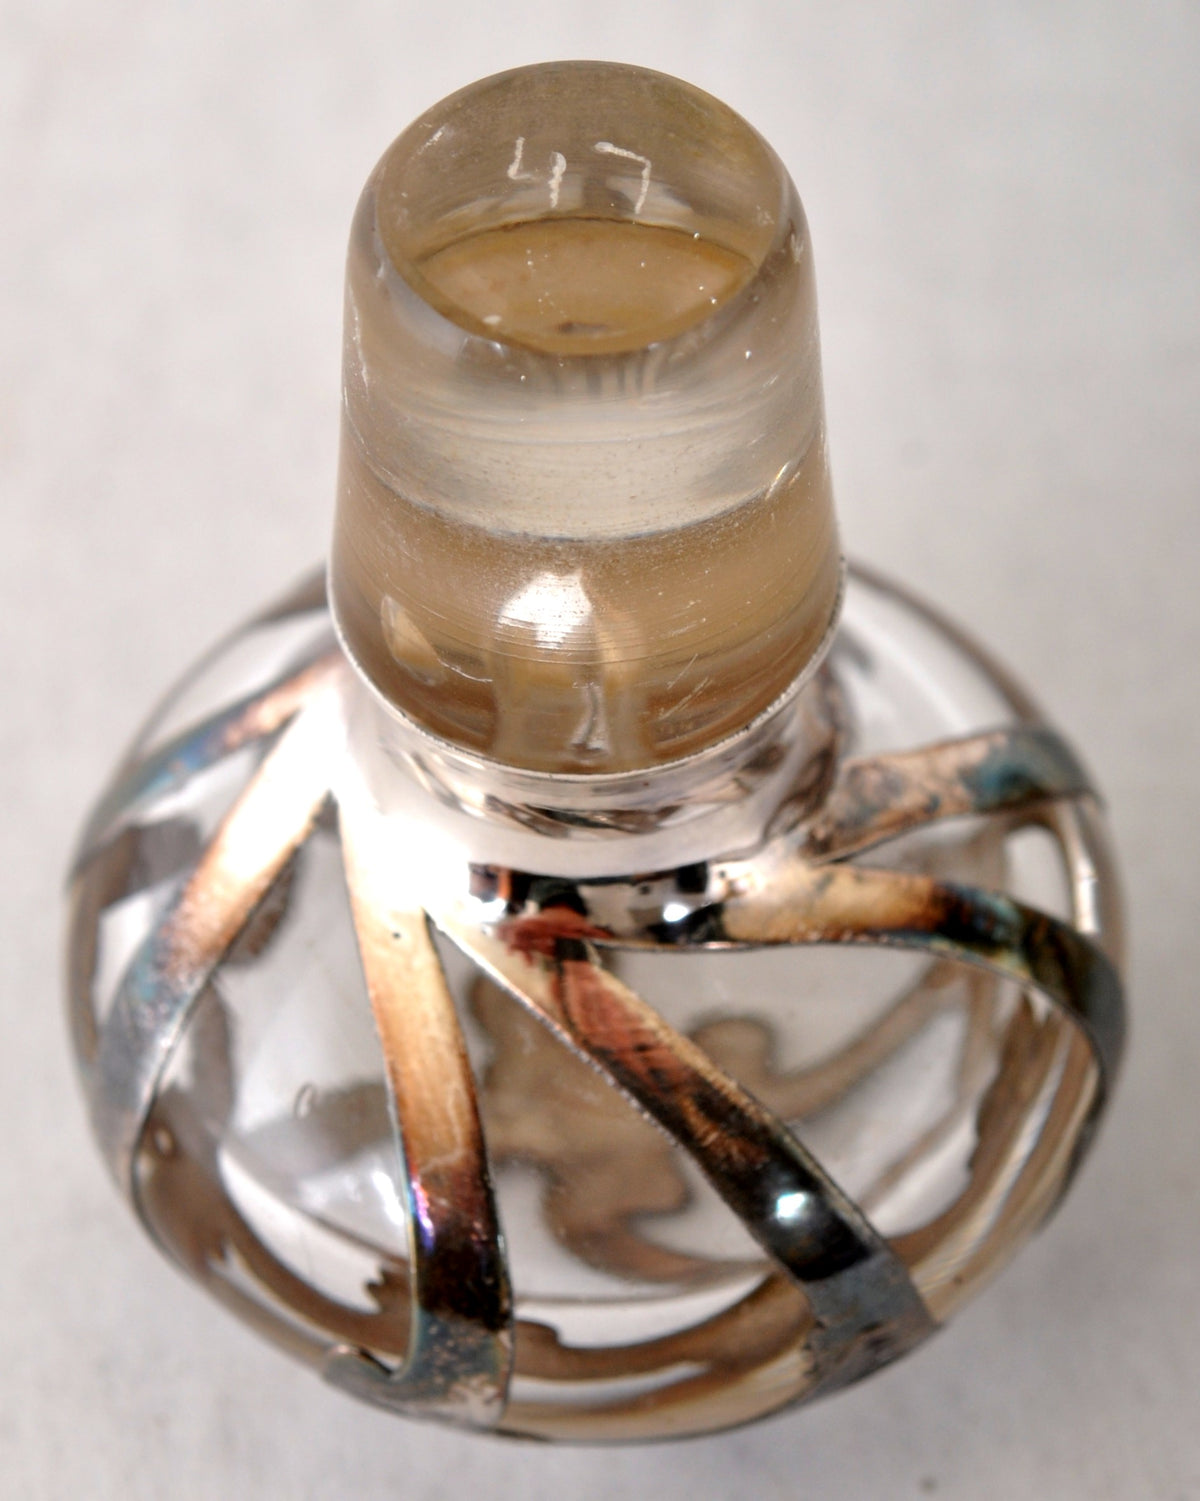 Antique Bohemian Glass Perfume Bottle with Engraved Silver Overlay, Circa 1890